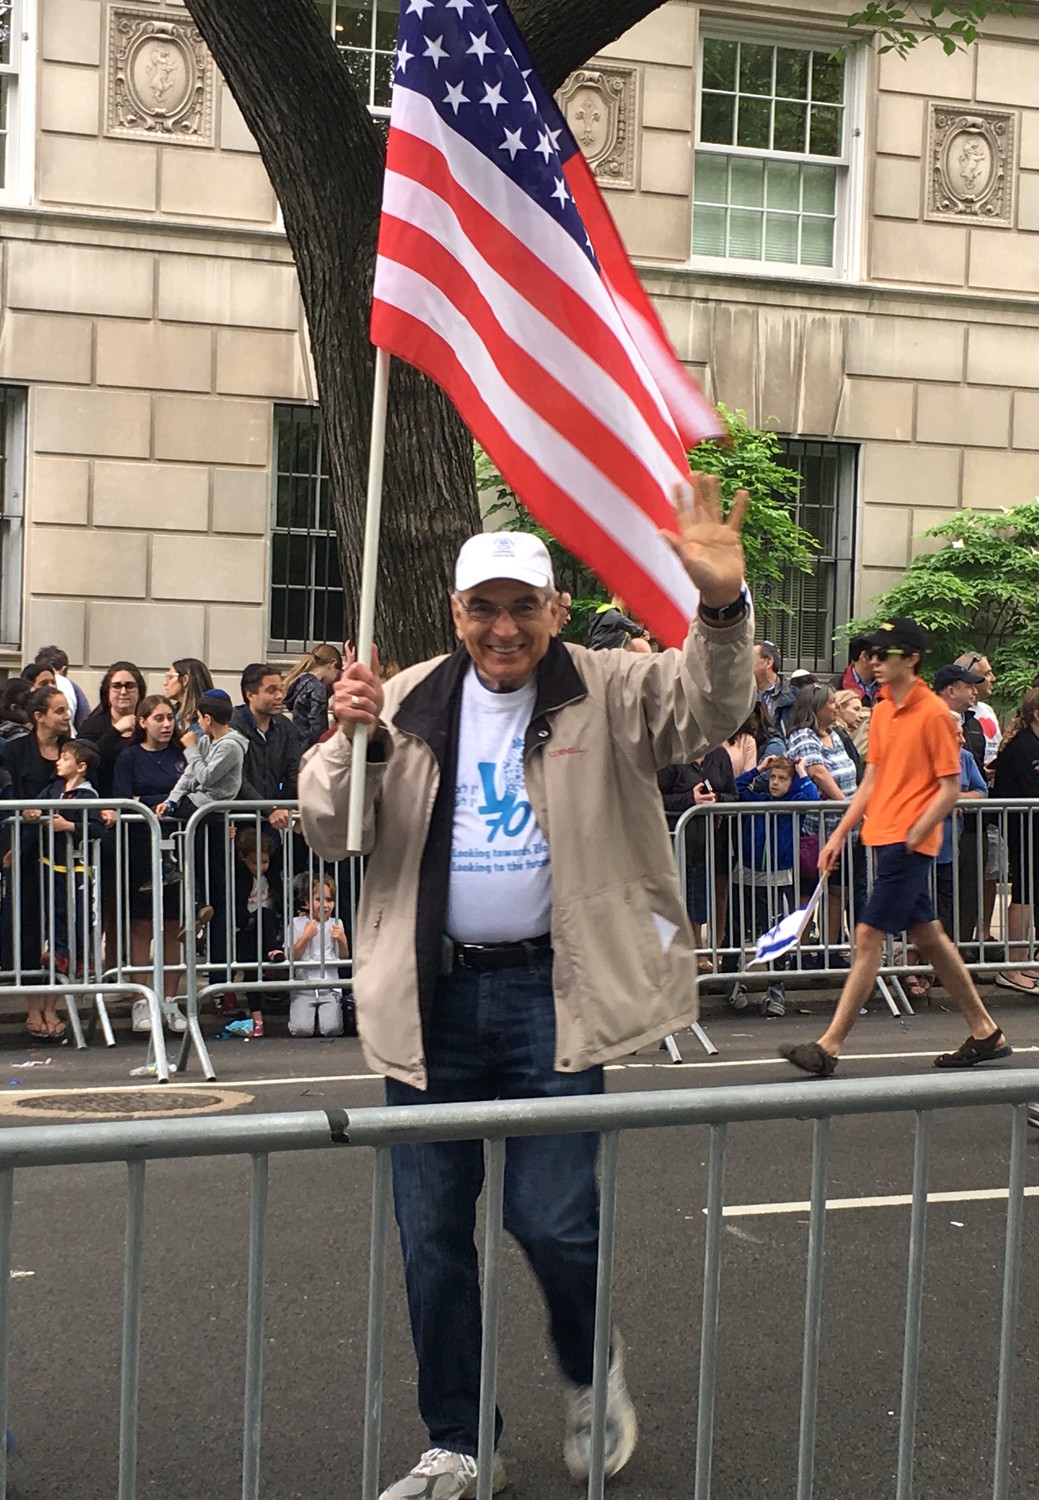 Wearing his Israel price and carrying America's colors: Barry Weintrob from Mill Basin.